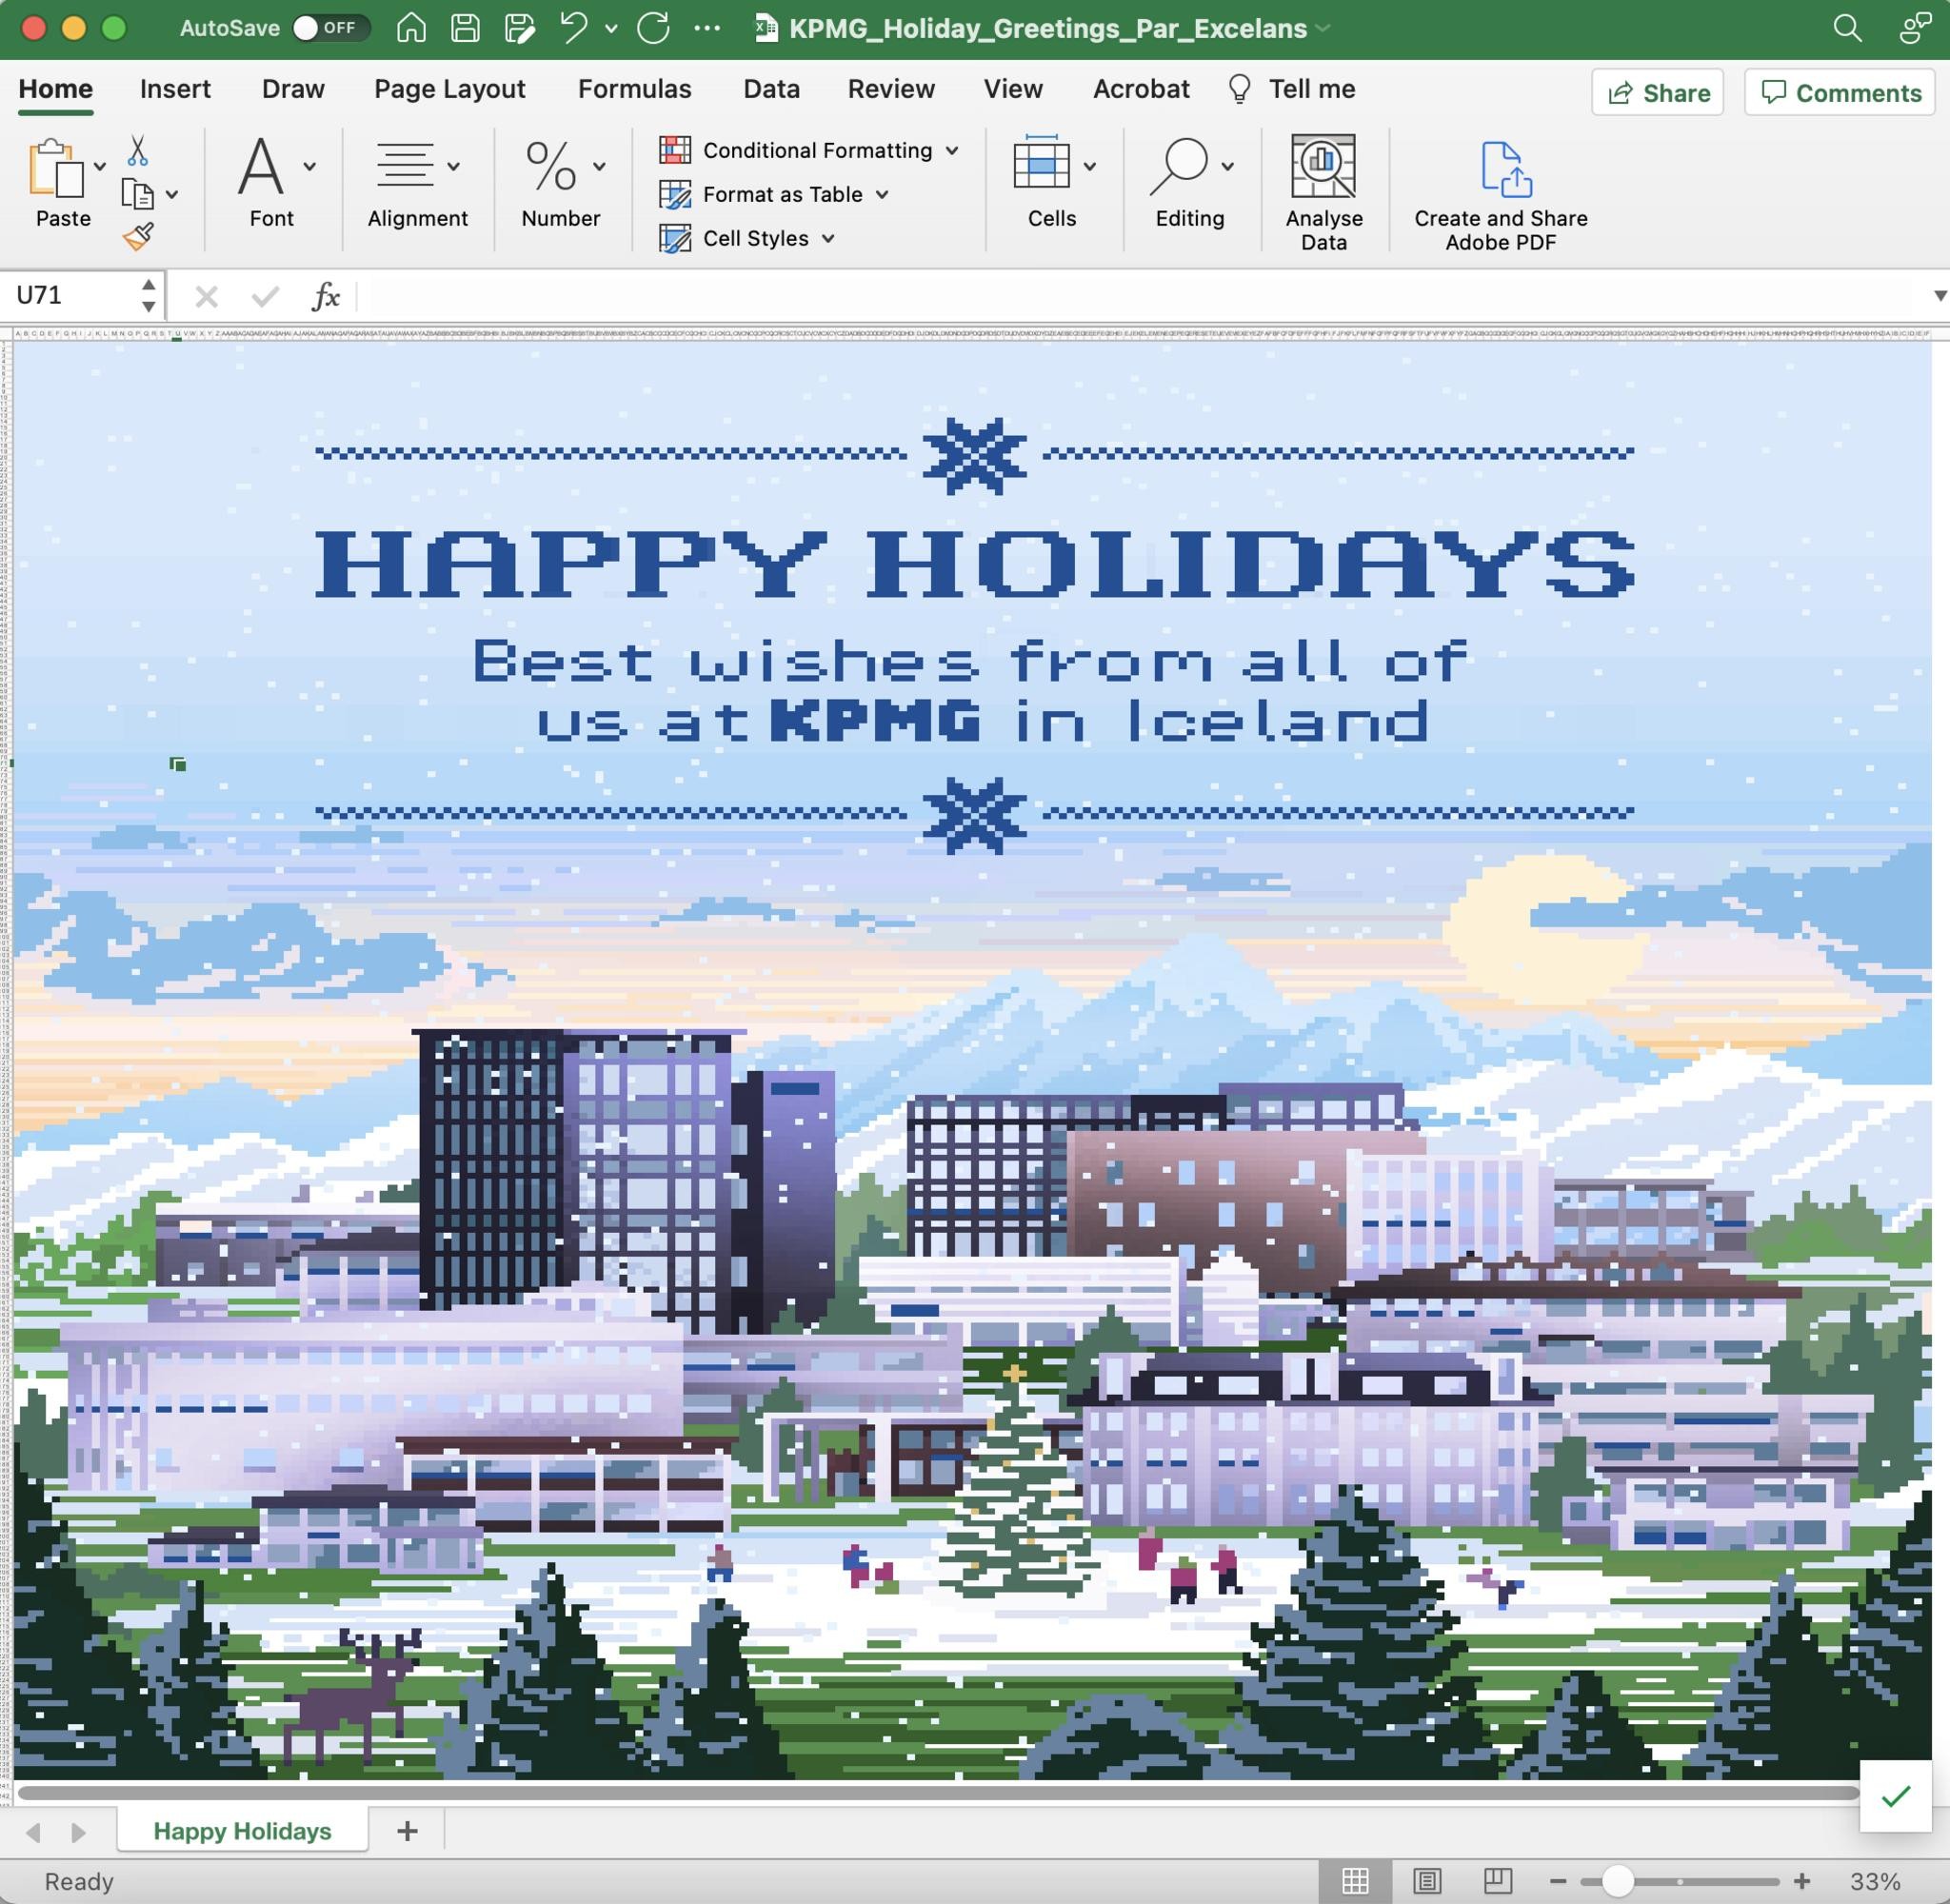 Holiday_Greeting_Par_Excelance.xls